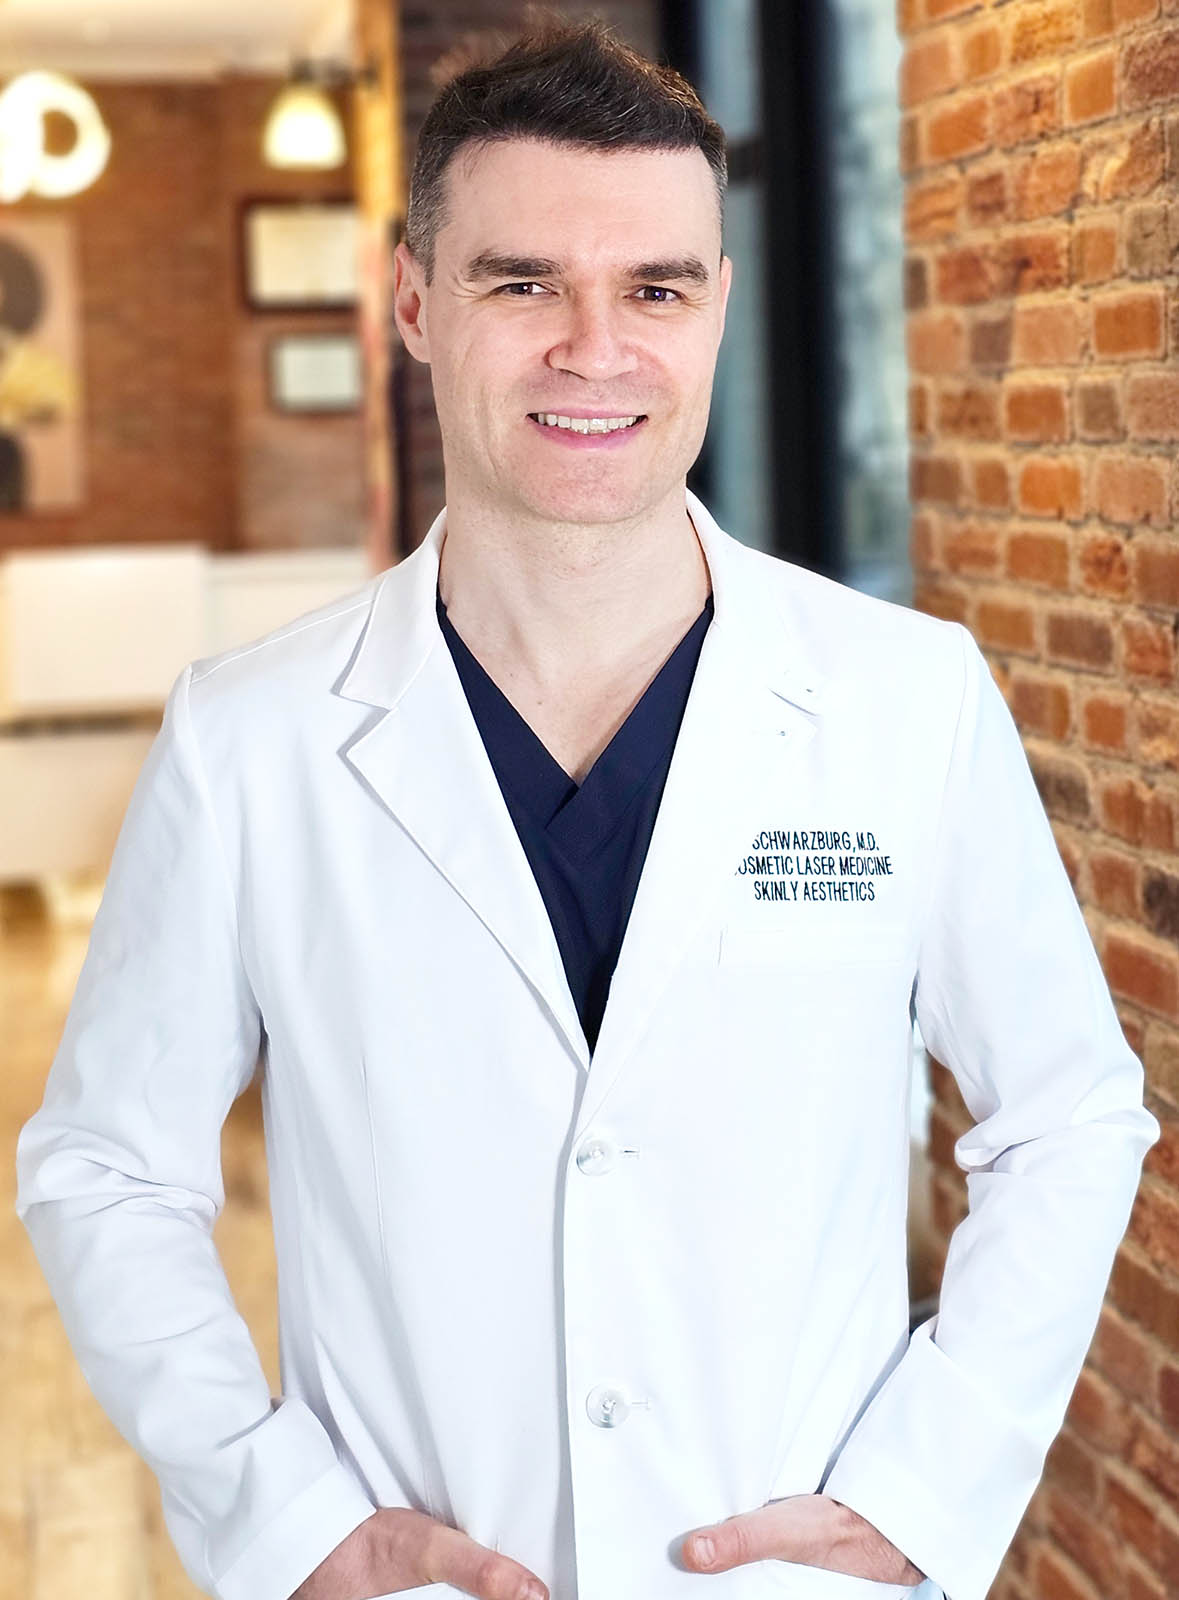 Dr. Schwarzburg is top rated cosmetic dermatologist in New York